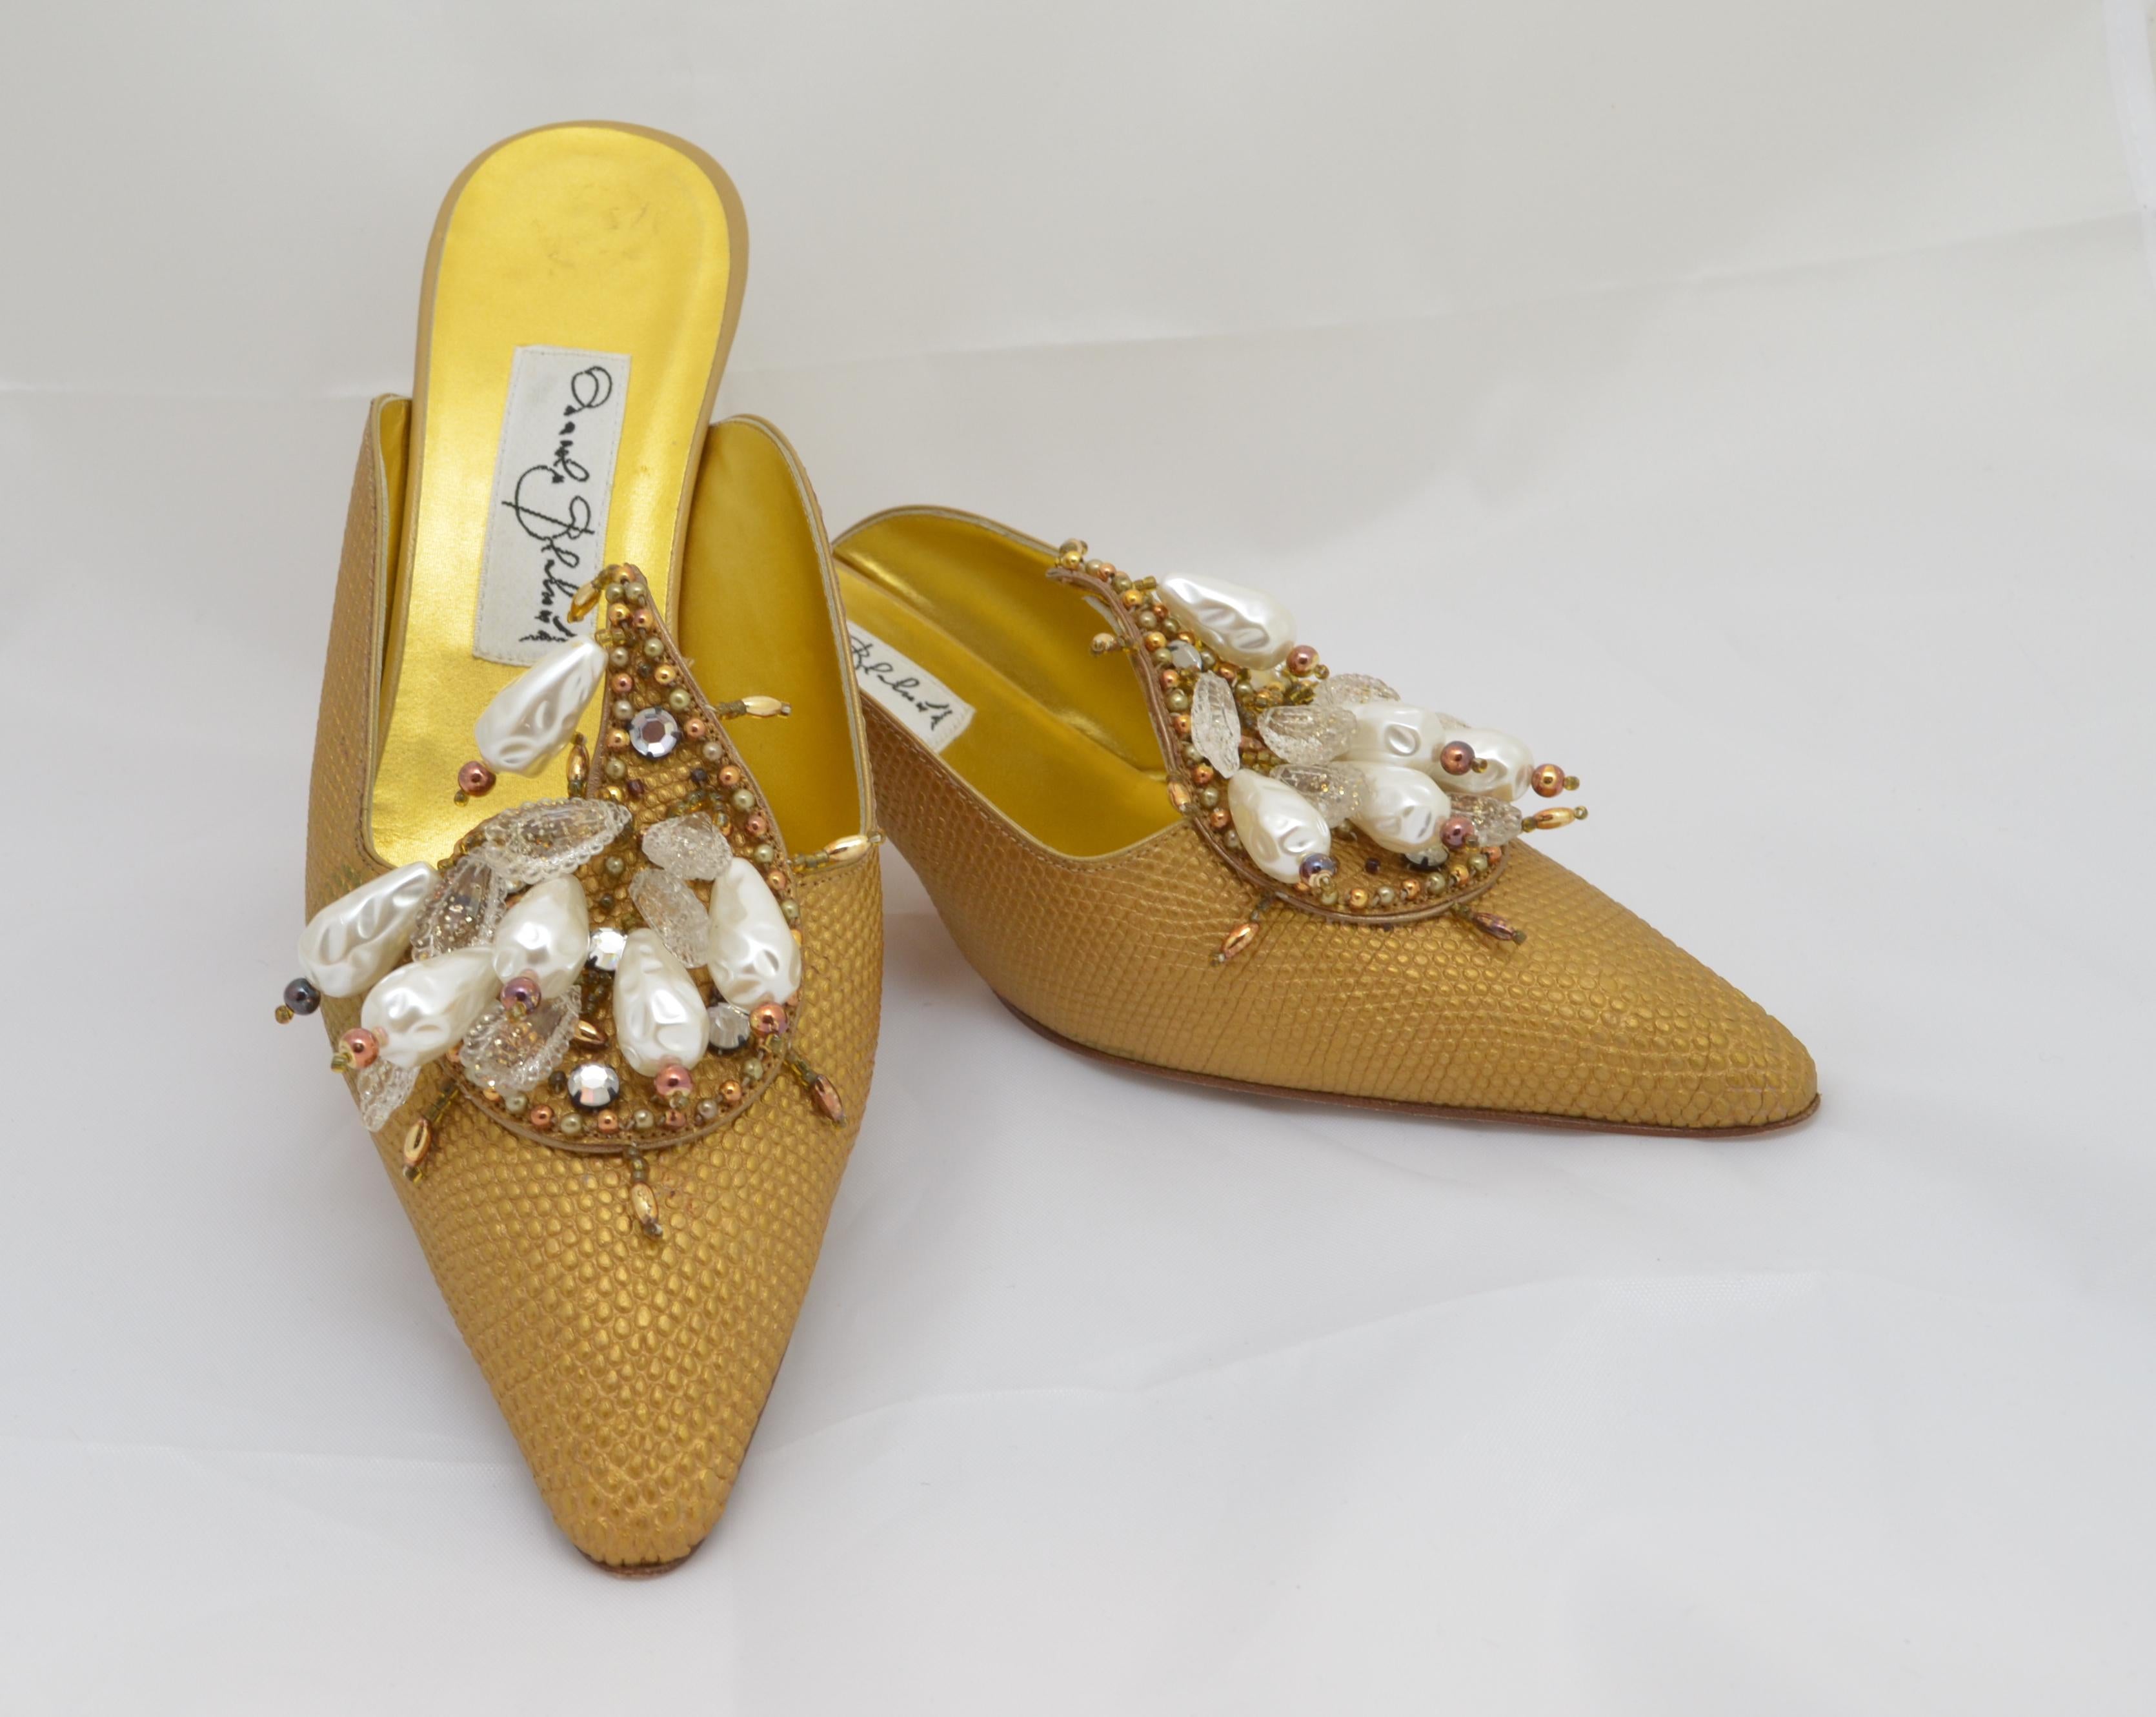 The shoes of Manolo Blahnik are internationally renowned for their beauty and elegance. These mules, with their low, curved heel and lavish ornamentation are an example of Blahnik's love of historic design, in particular the styles of the 18th